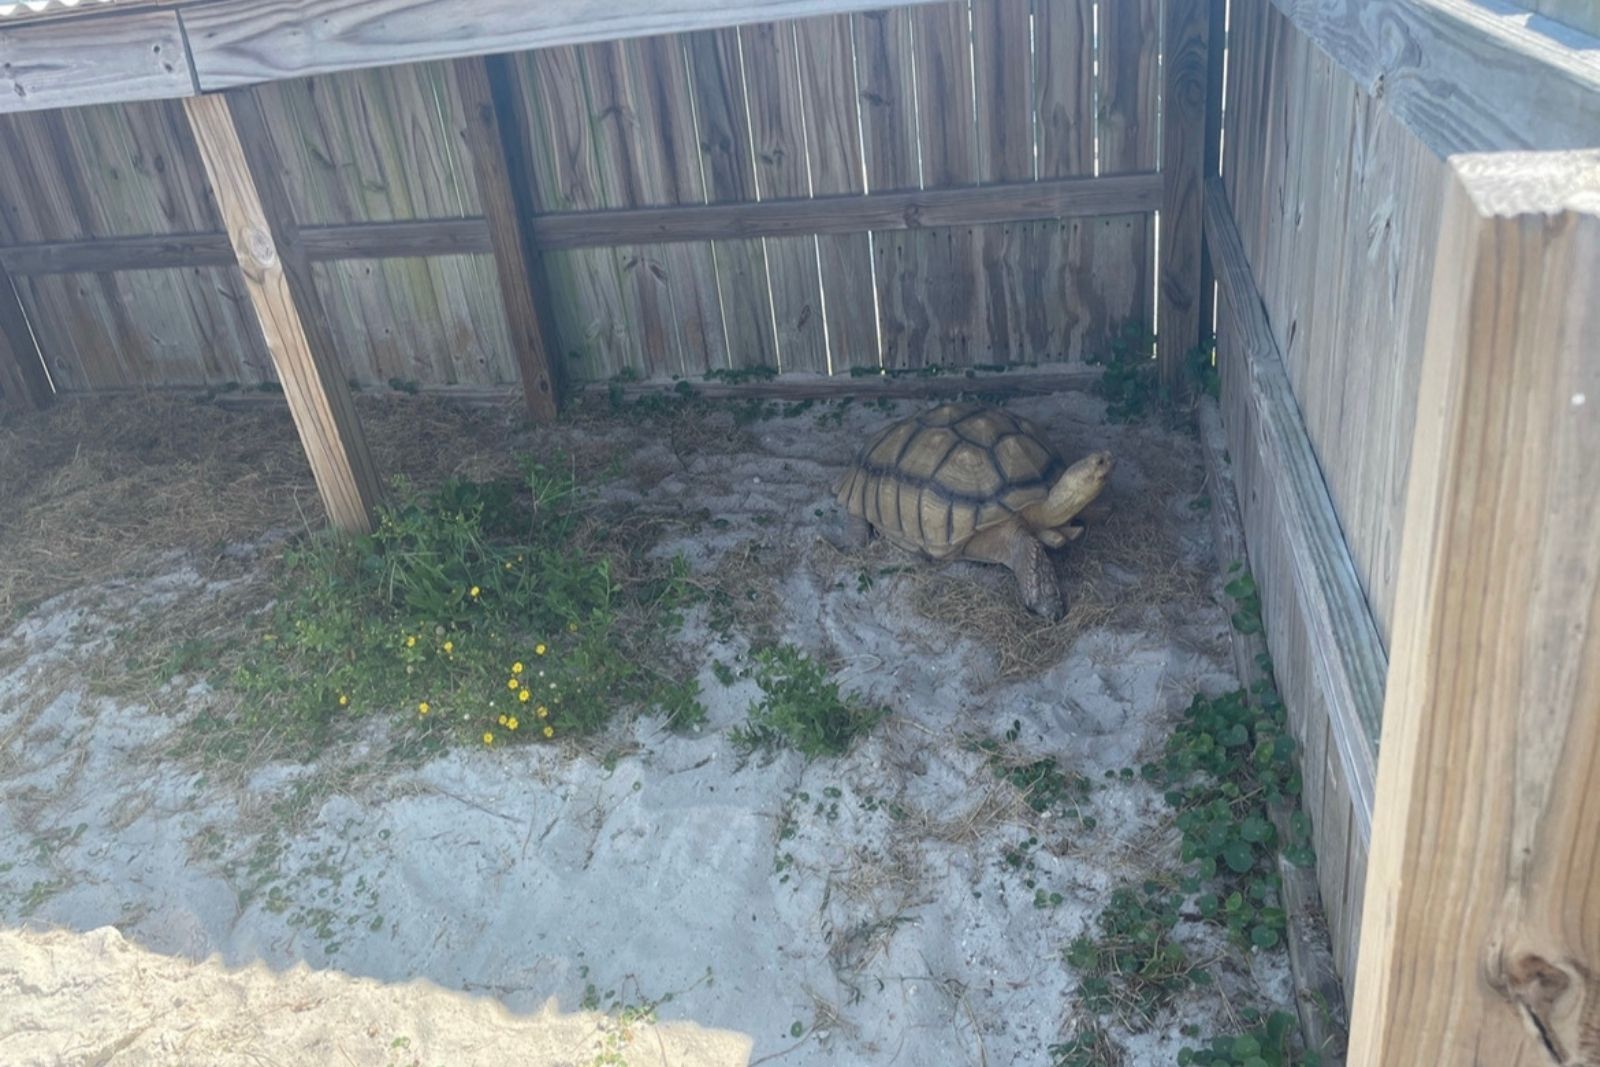 When in Navarre Beach, be sure to visit the Sea Turtle Conservation Center, where their mission is to protect these animals in pensicola beach